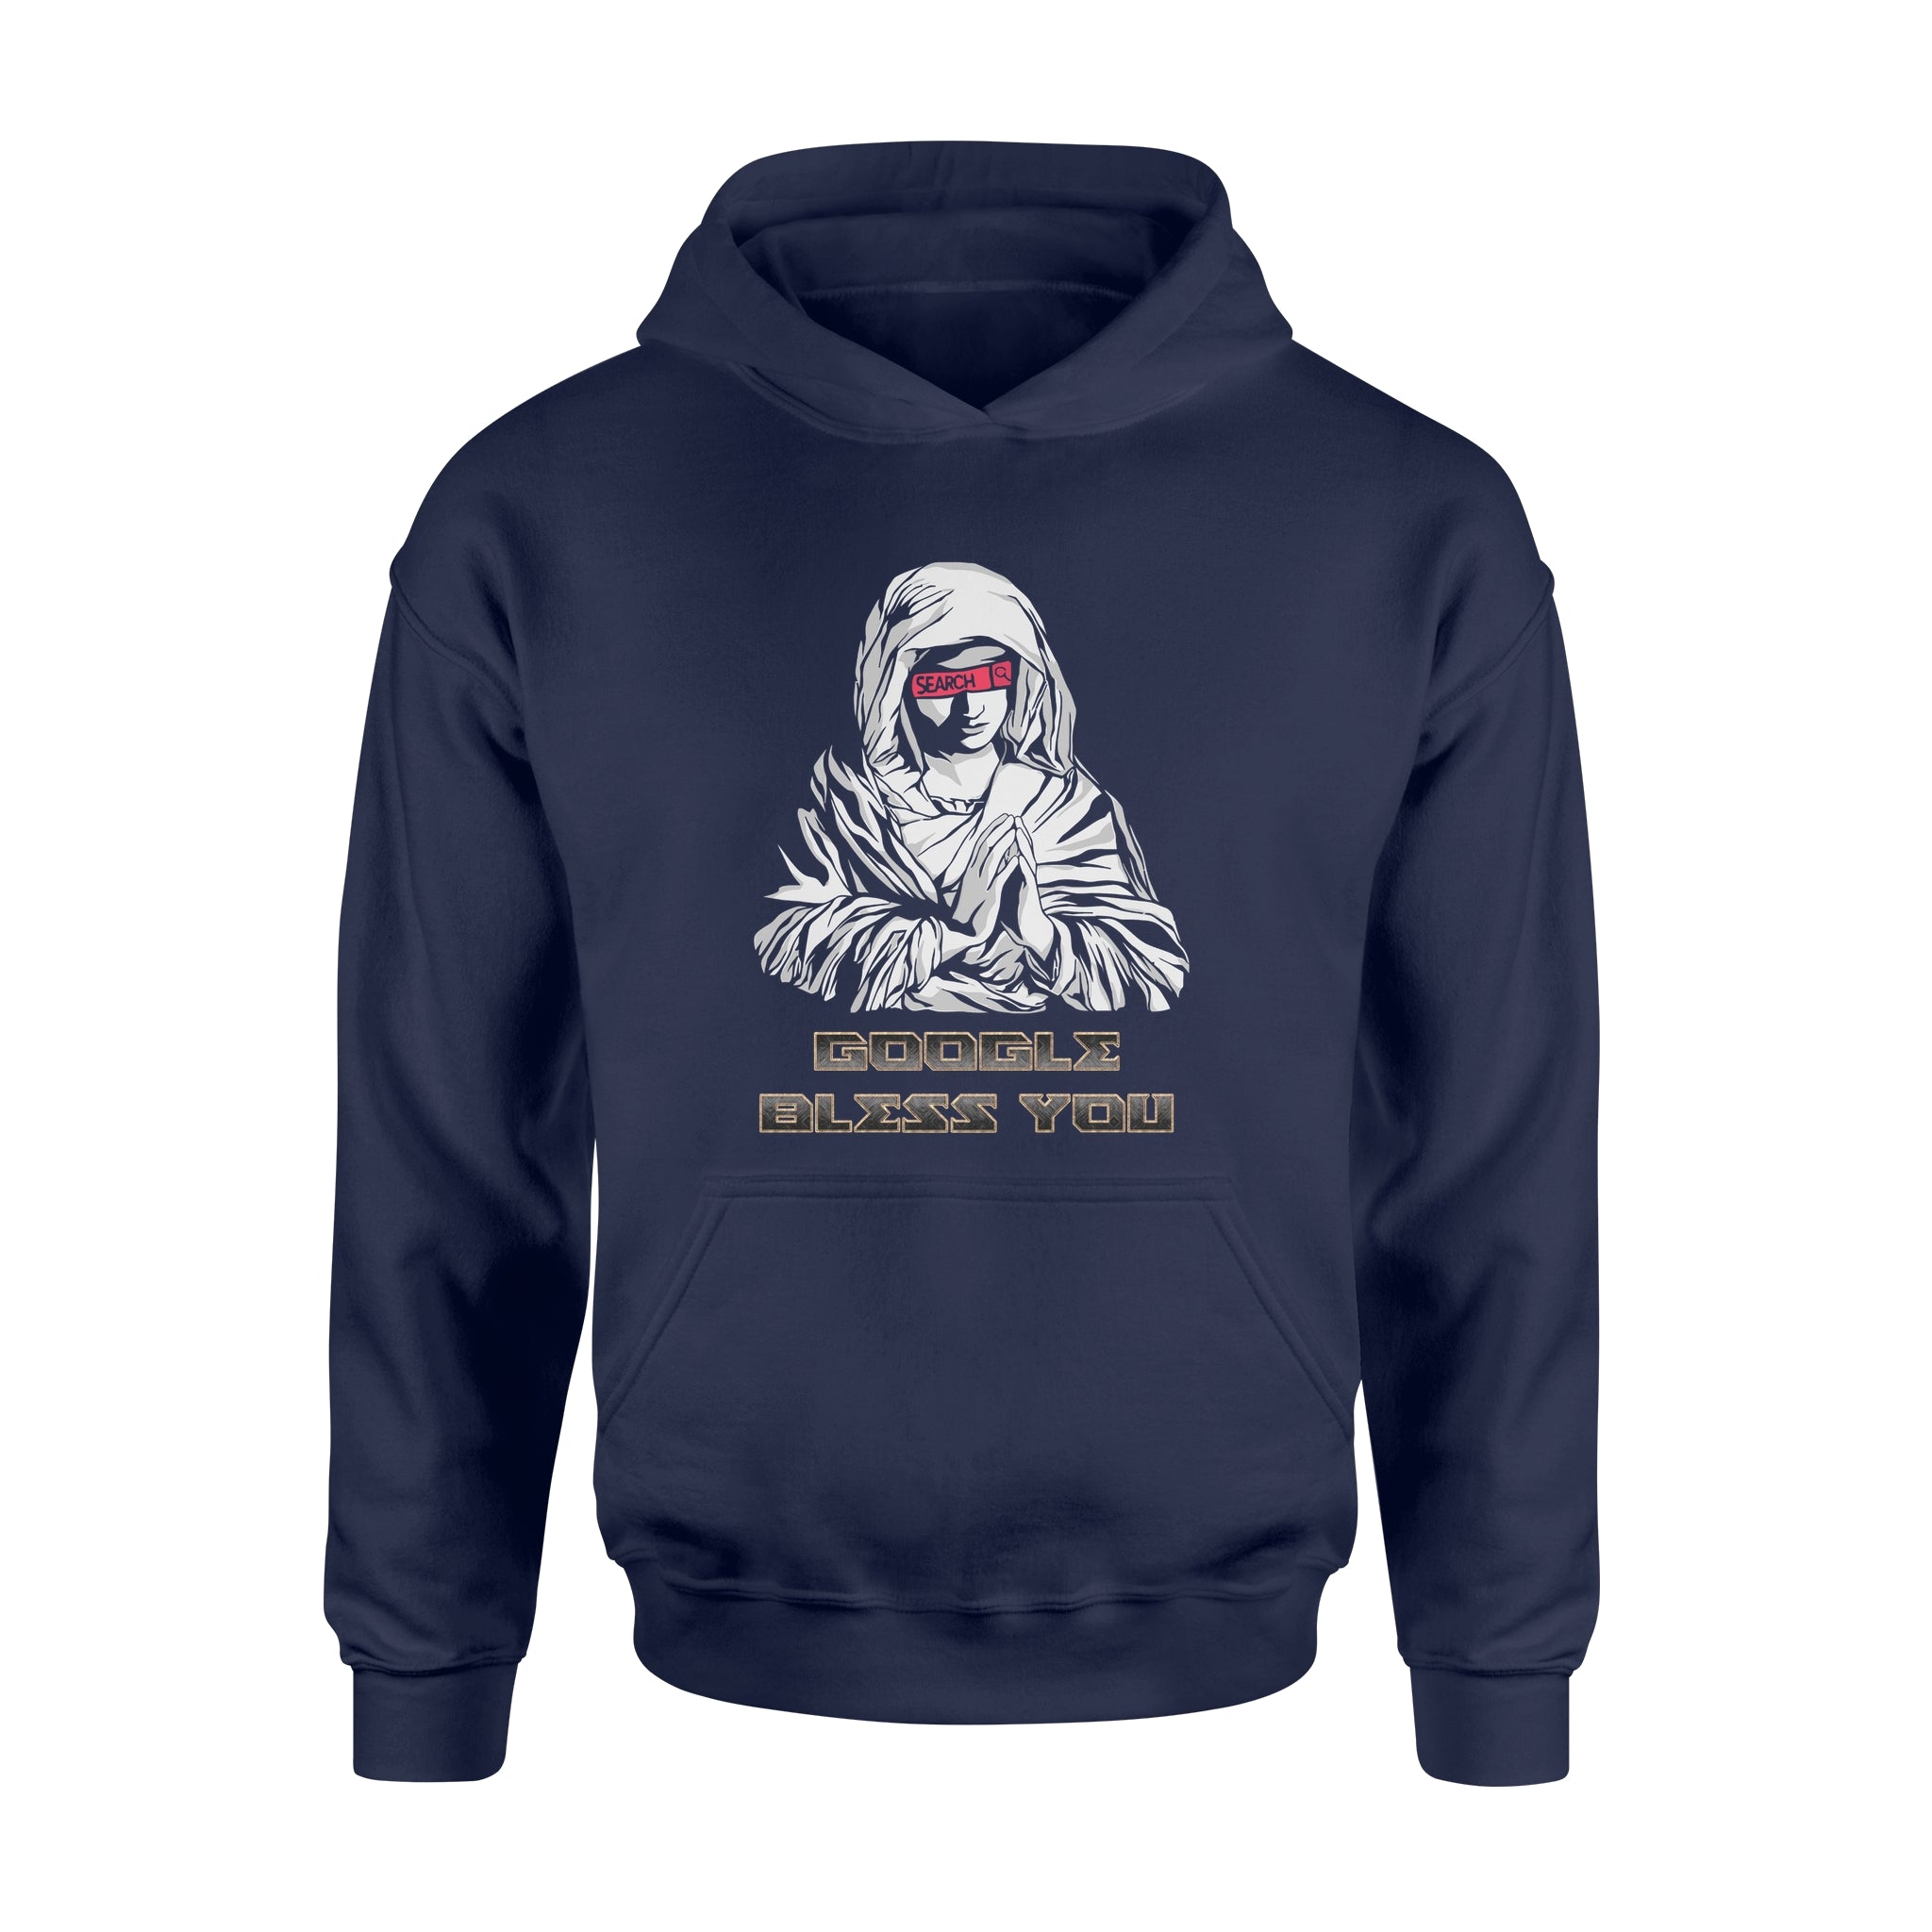 Google Bless You - Hoodie